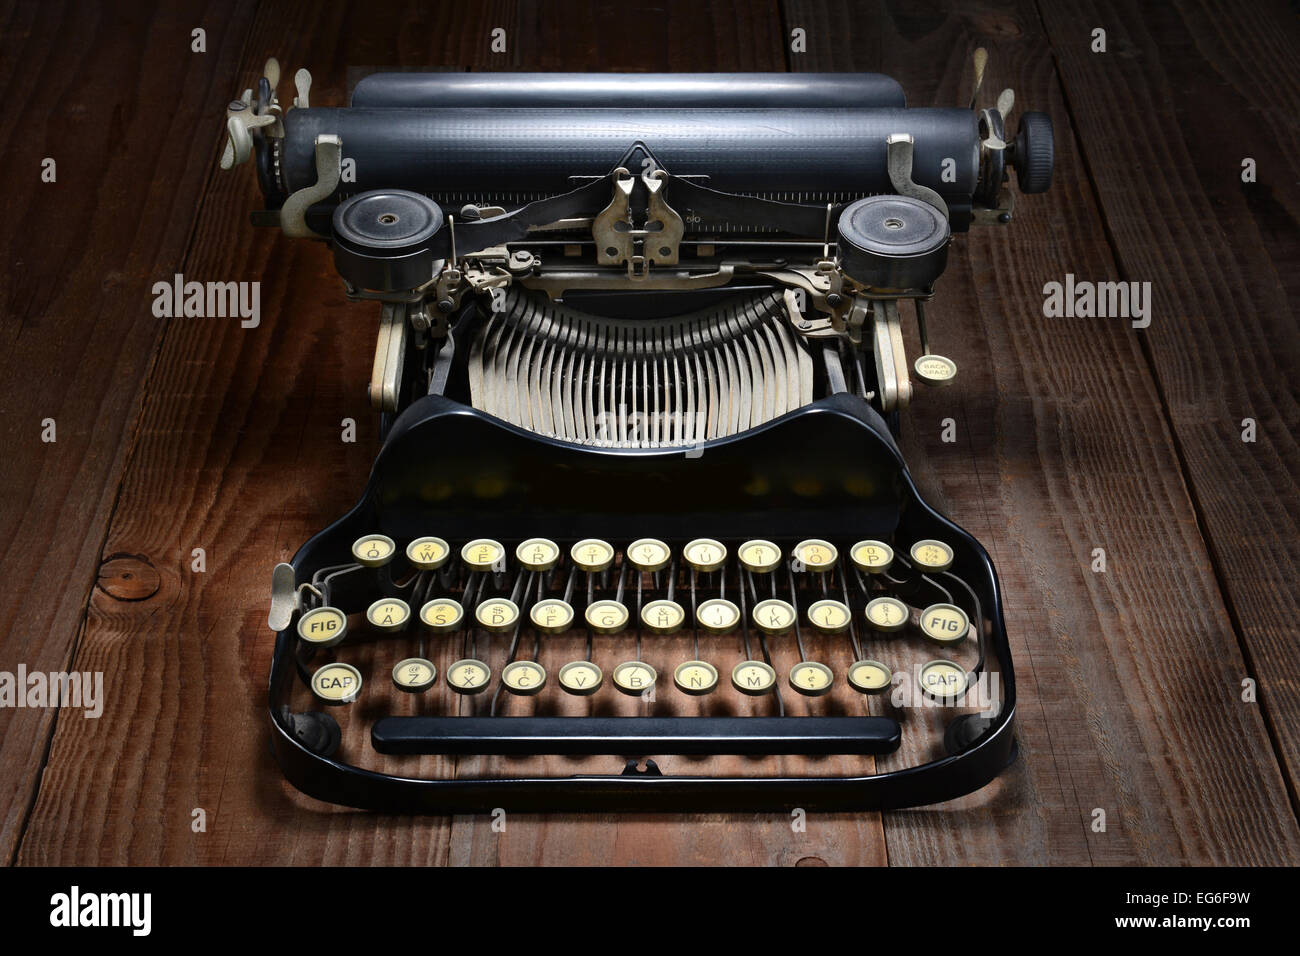 Overhead shot of an antique typewriter on a rustic wood table. Horizontal format with directional lighting. Stock Photo